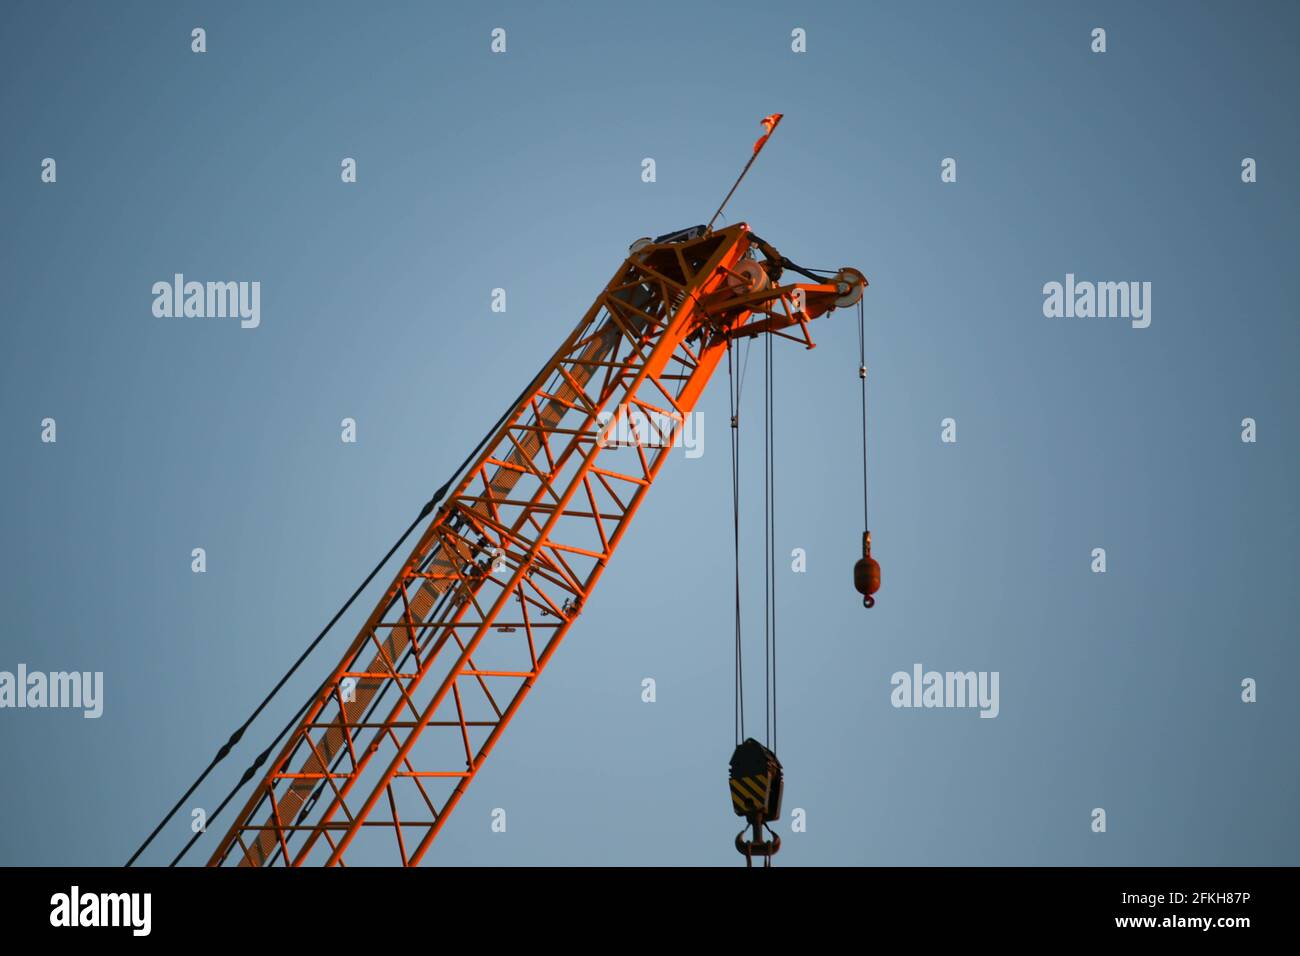 Washington, D.C., USA. 1st May, 2021. A crane stands over the newly upgraded 11th Street Bridge in the Navy Yard neighborhood along the Anacostia River at sunset. Credit: Bryan Dozier/Alamy Live News Stock Photo